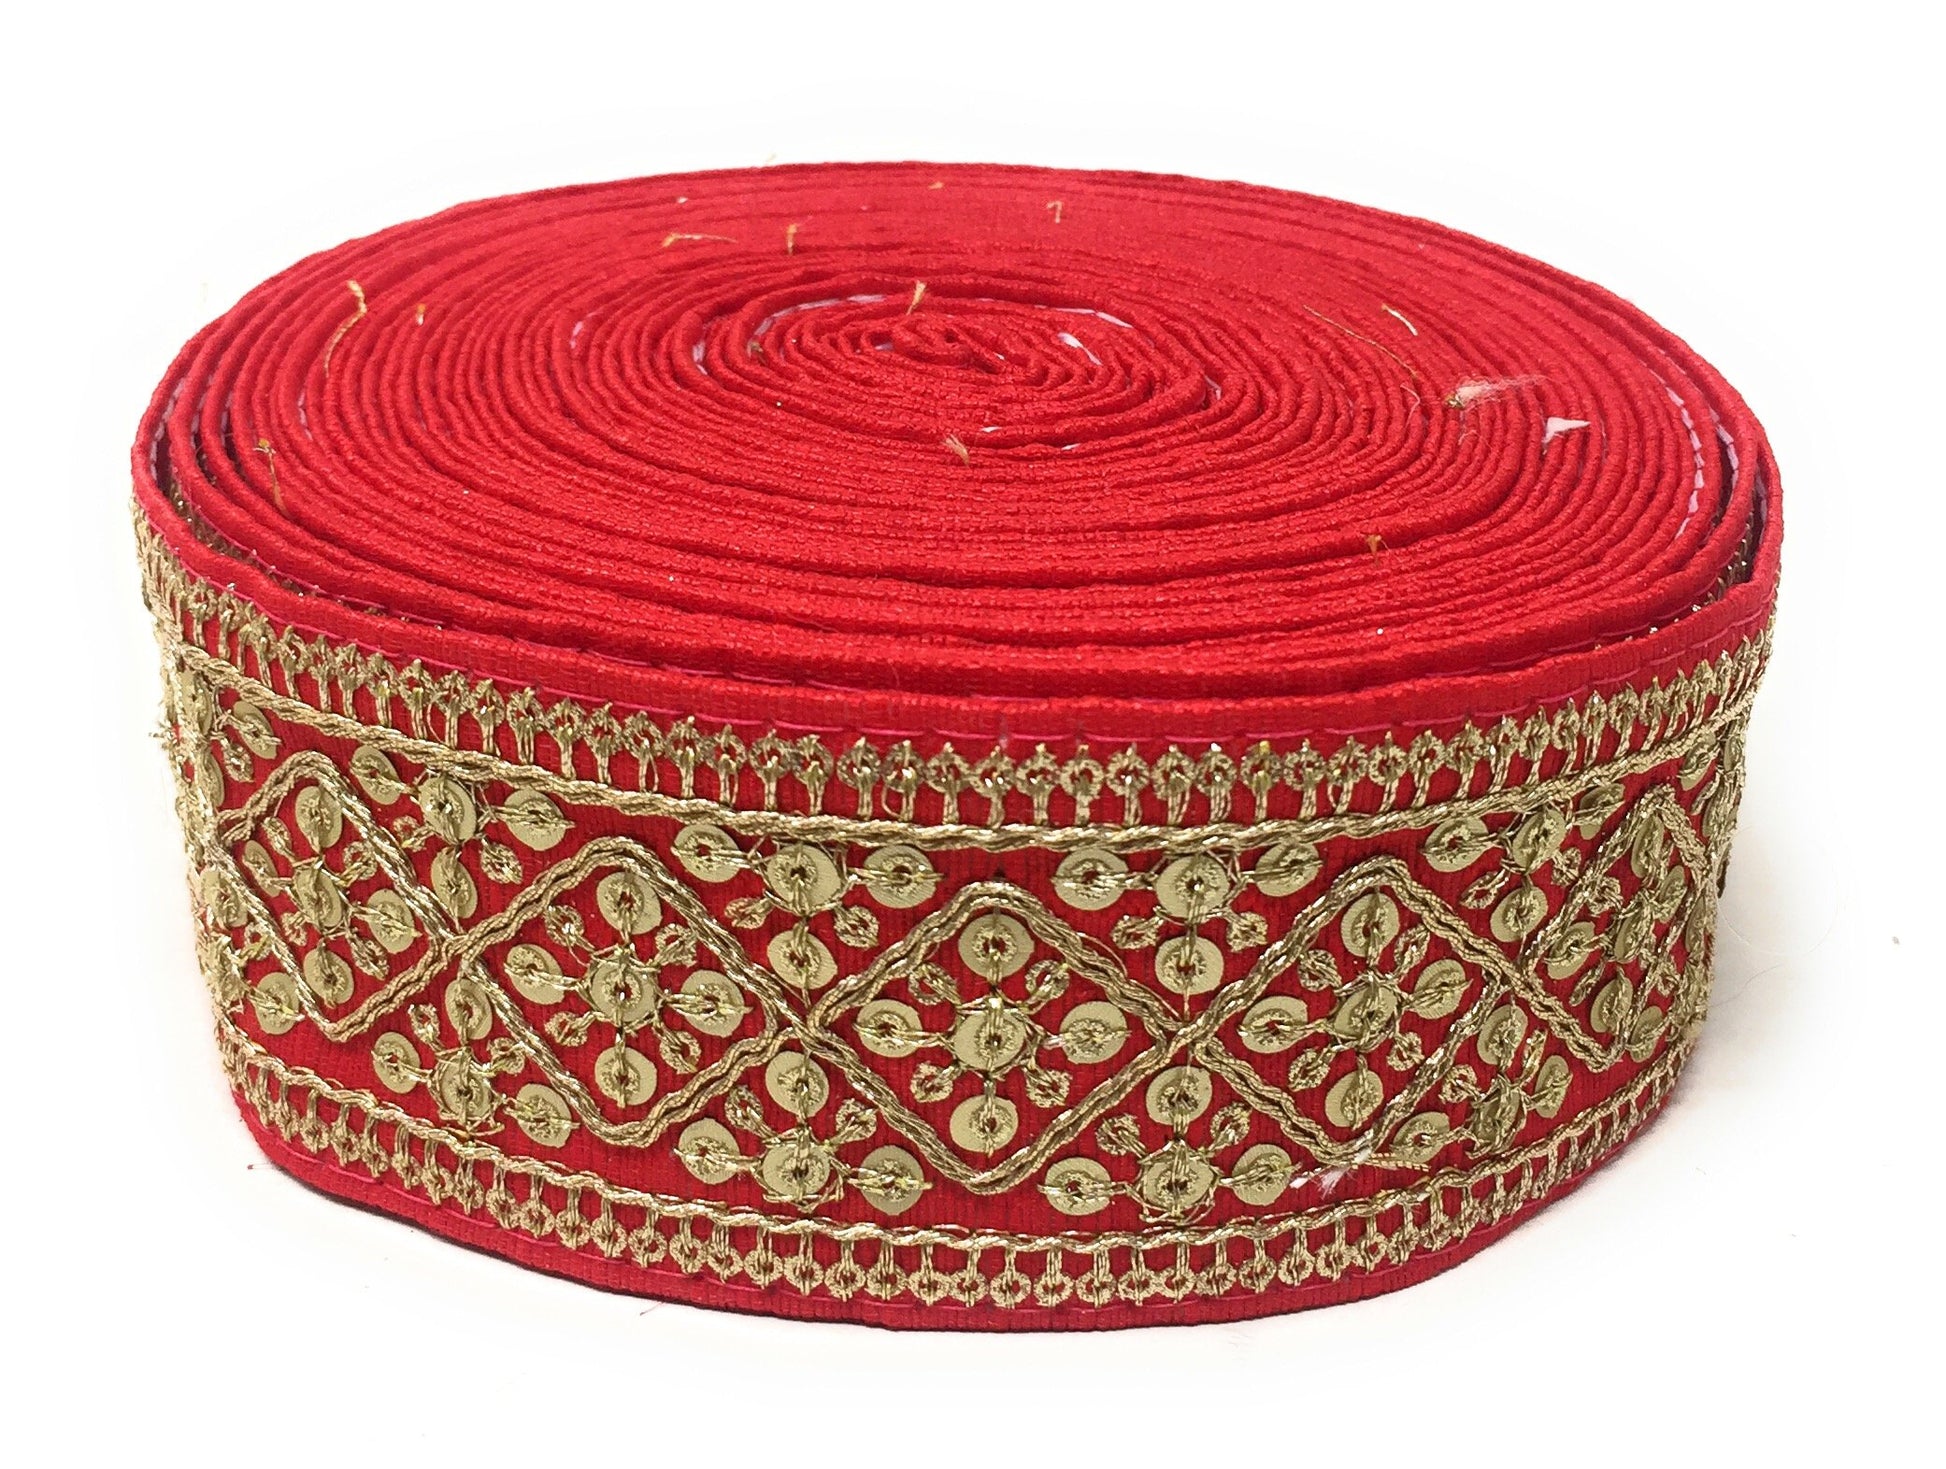 Carrot Red Sequins Embroidery Saree Border Trim - 9 Meter Roll